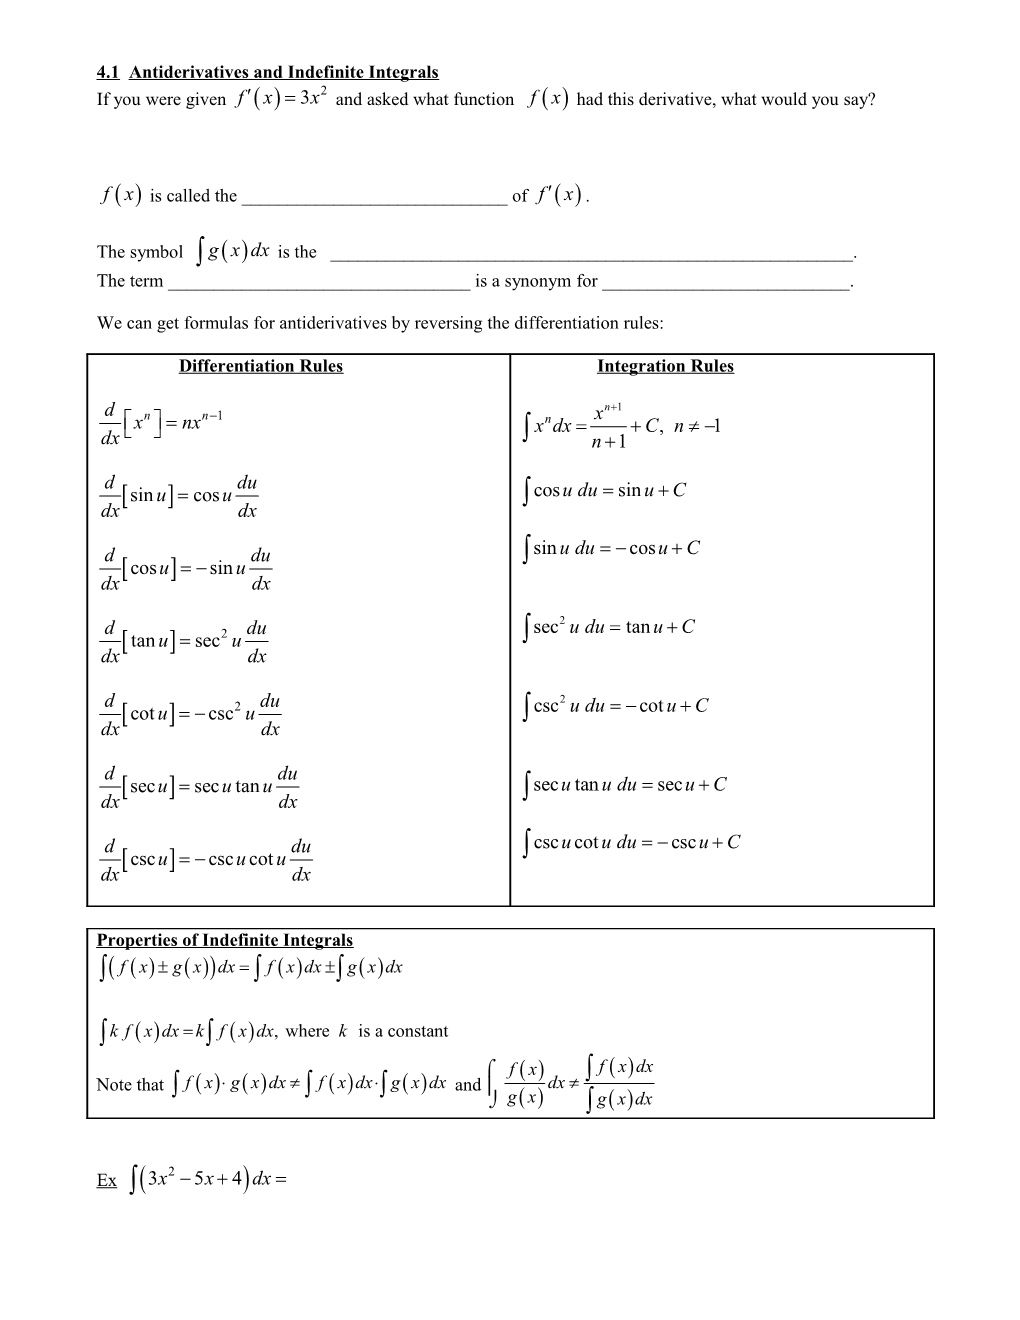 4.1 Antiderivatives and Indefinite Integrals